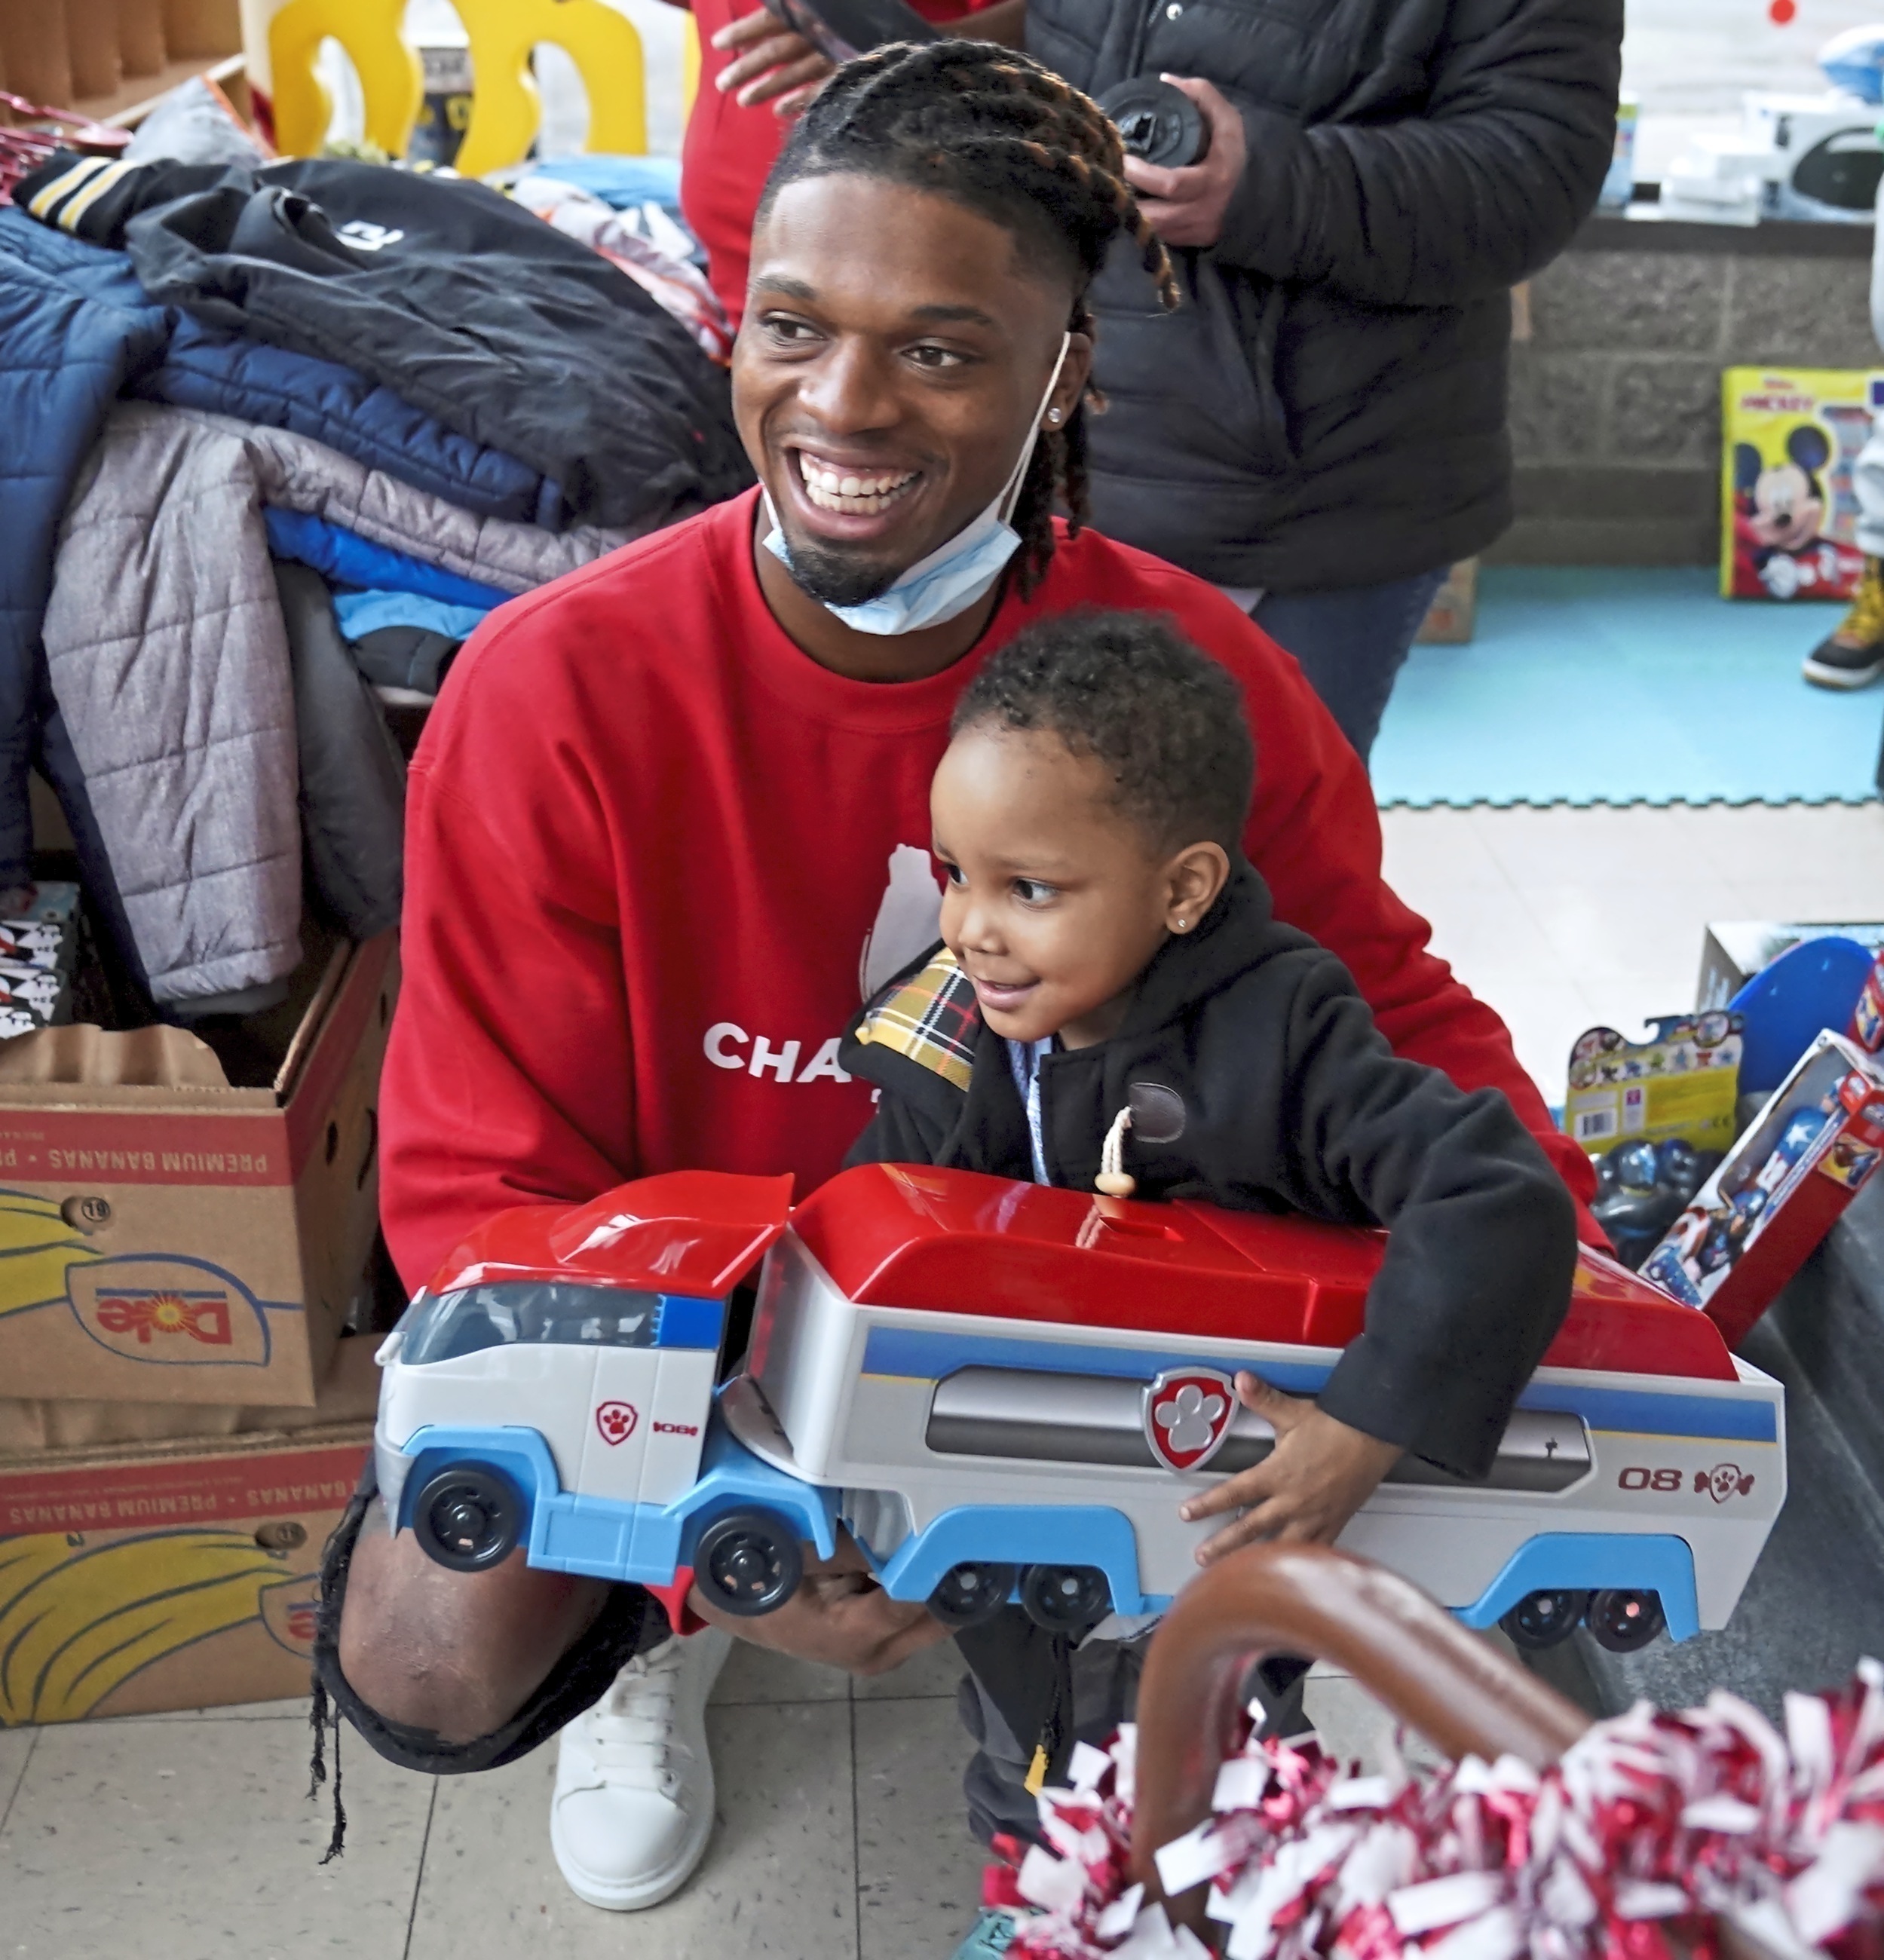 Then a college football defensive back in Pittsburgh, Damar Hamlin poses for a photo with Bryce Williams, 3, after the youngster picked out a toy during Hamlin's Chasing M's Foundation community toy drive at Kelly and Nina's Daycare Center in McKees Rocks, Pa., Dec. 22, 2020. (Matt Freed—Pittsburgh Post-Gazette/AP)